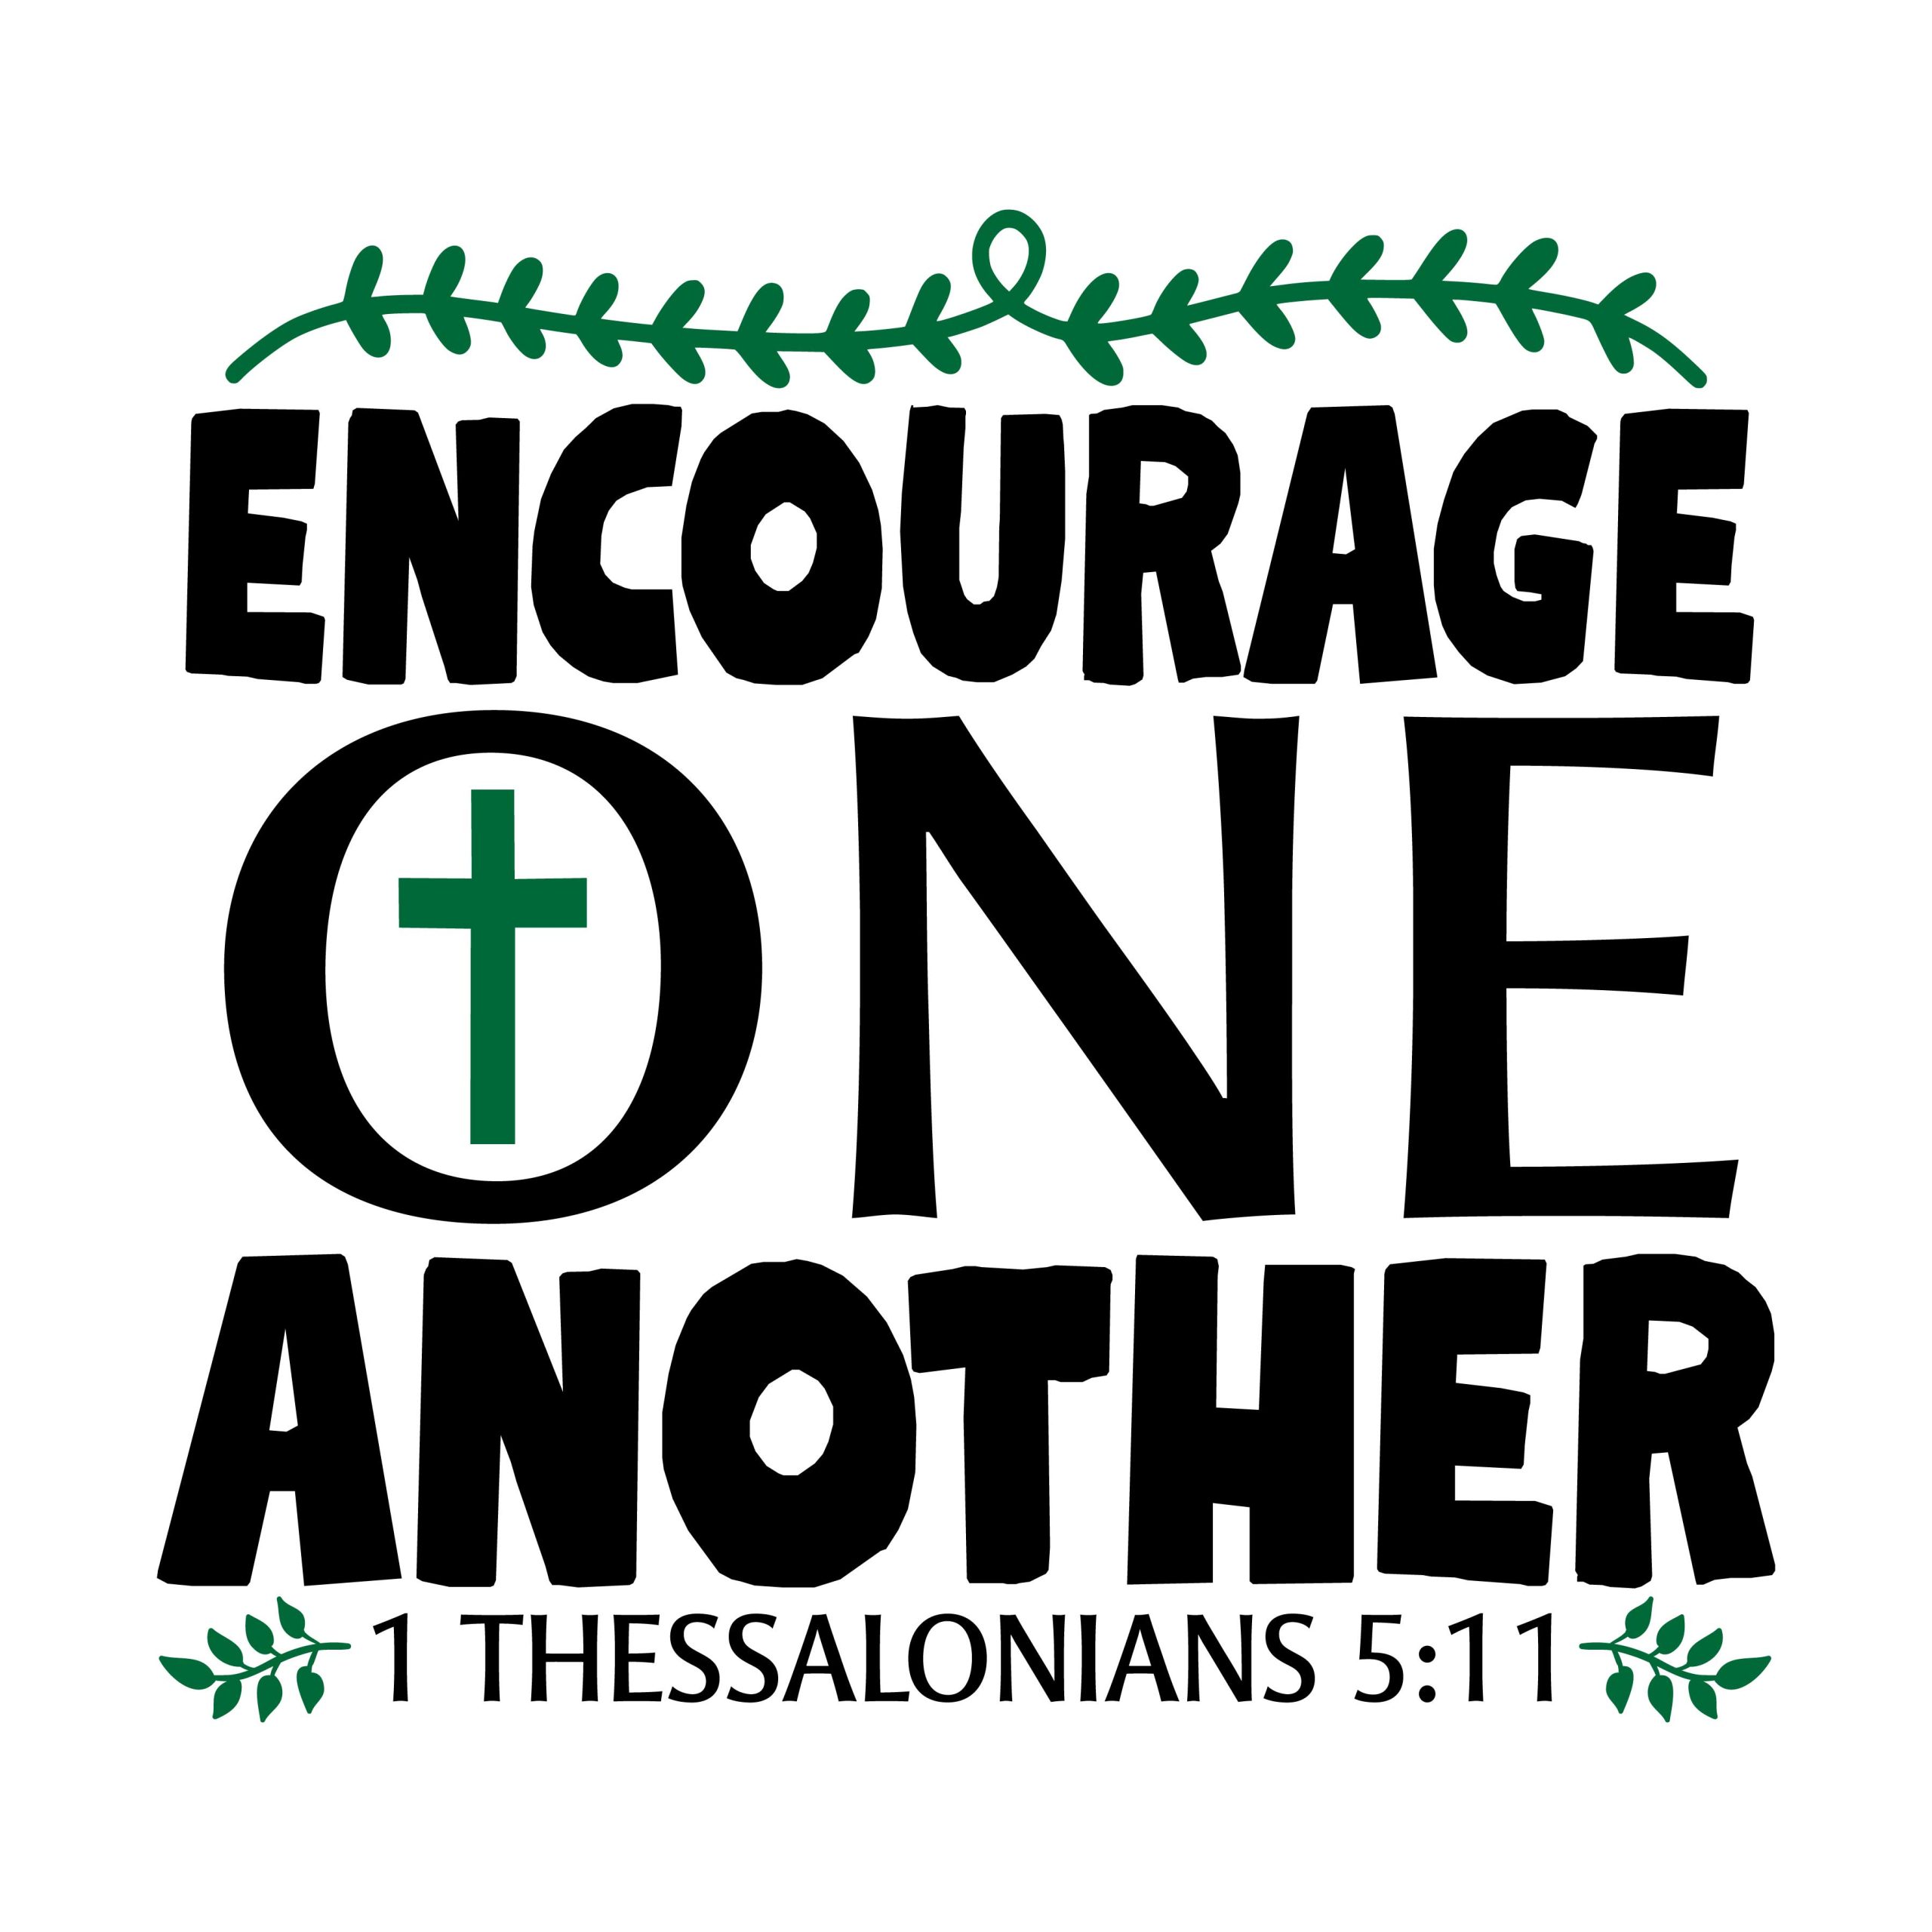 Encourage one another 1 Thessalonians 5:11, bible verses, scripture verses, svg files, passages, sayings, cricut designs, silhouette, embroidery, bundle, free cut files, design space, vector